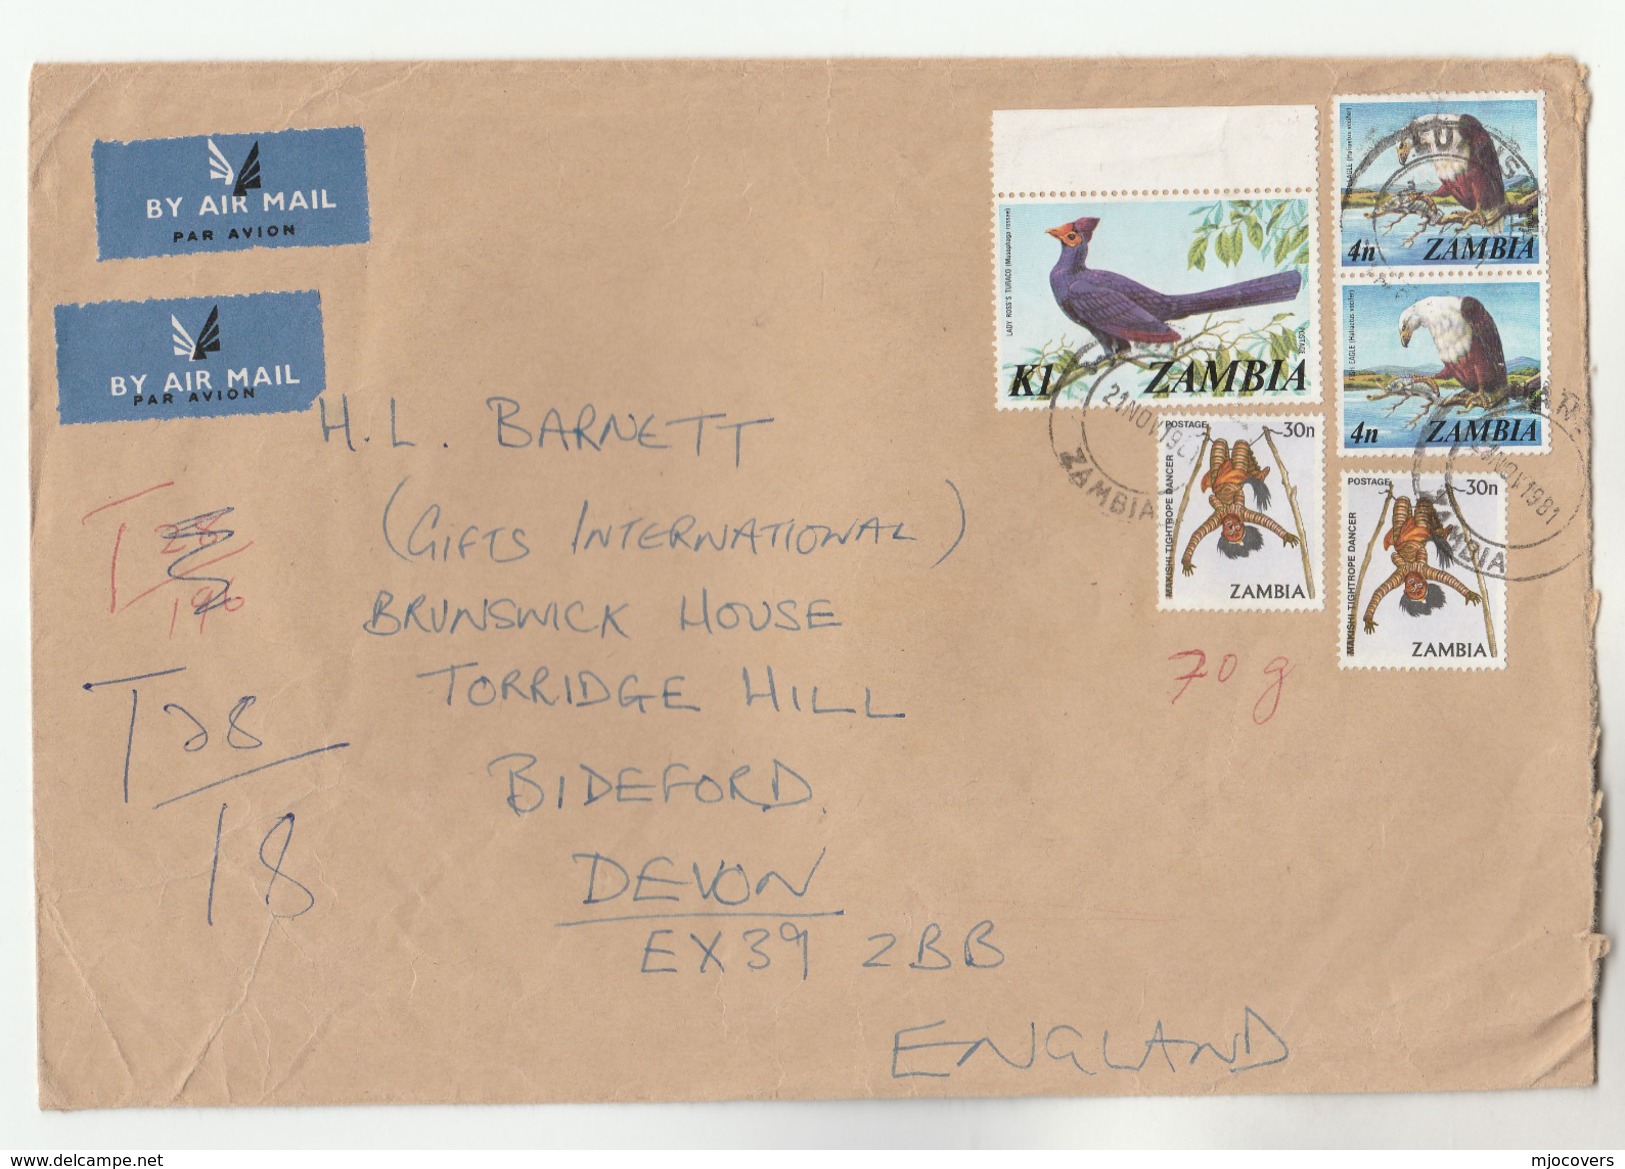 1981 ZAMBIA COVER Stamps 1k TURACO 2x 4n EAGLE 2x 30n With T28/17 Tax UNDERPAID To GB, Airmail Label Birds Bird - Zambia (1965-...)